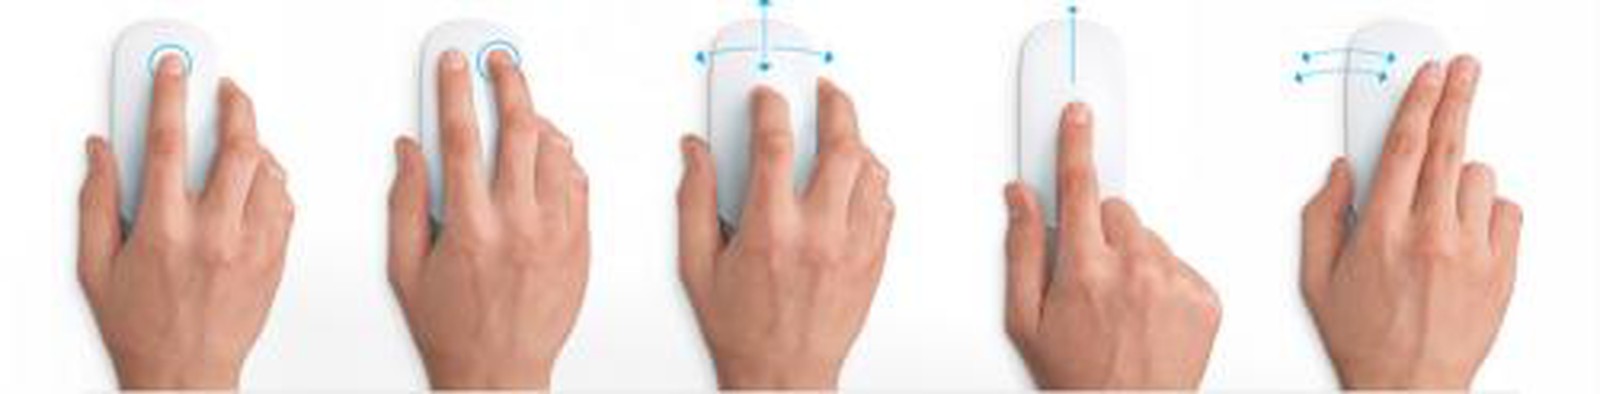 microsoft mouse gestures